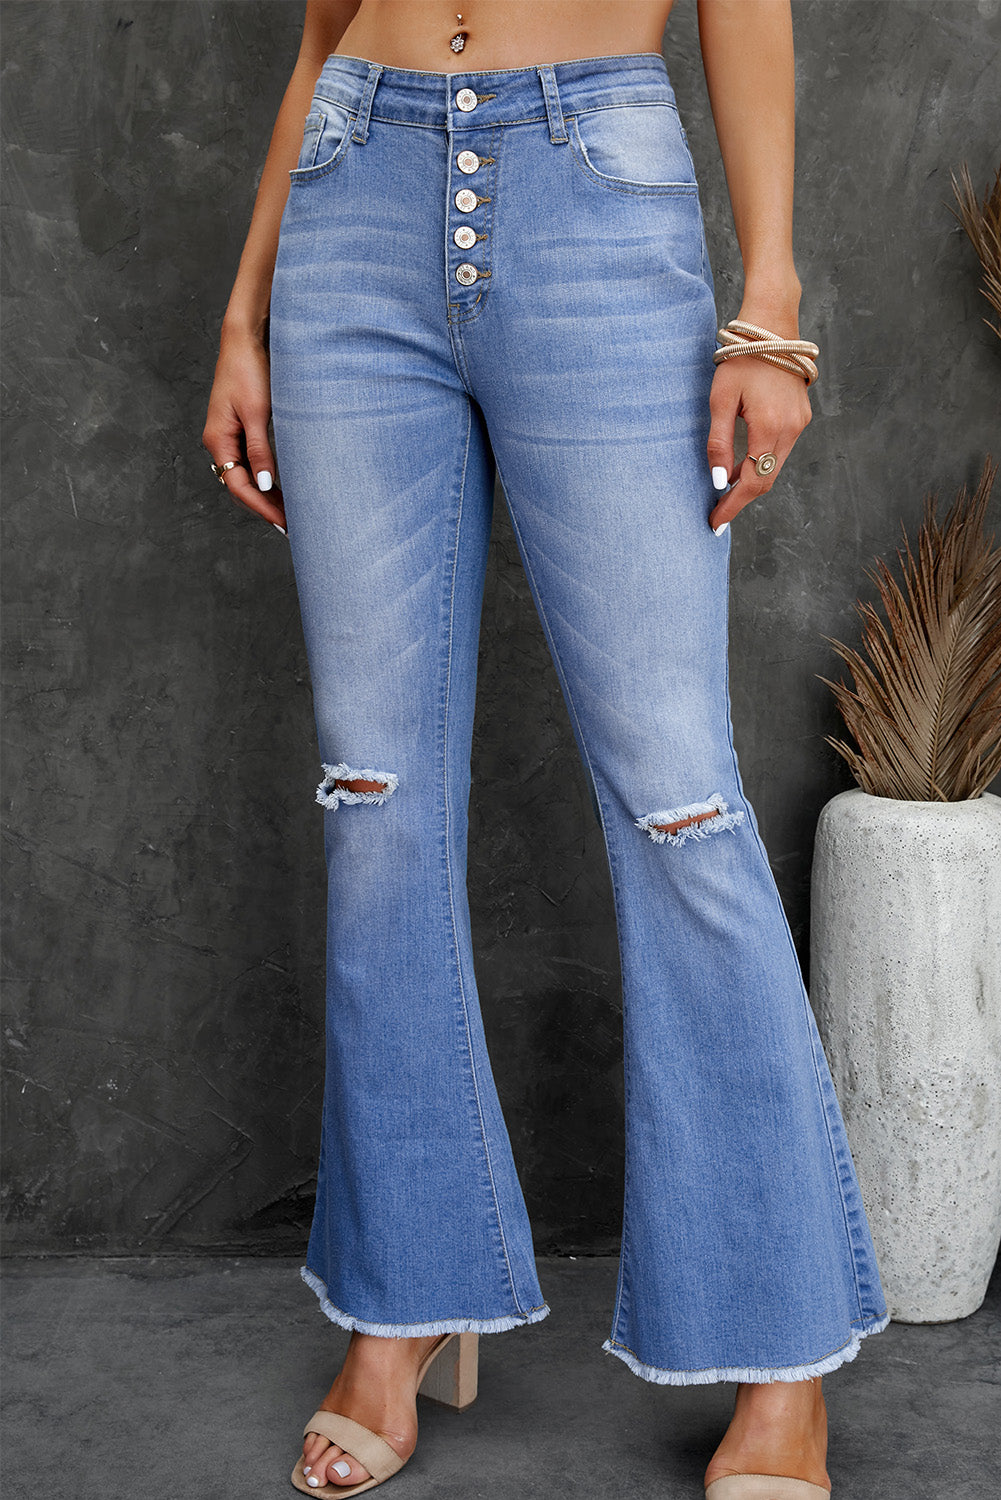 SOUTHERN HONEY HIGH WAIST BUTTON FLARE JEANS